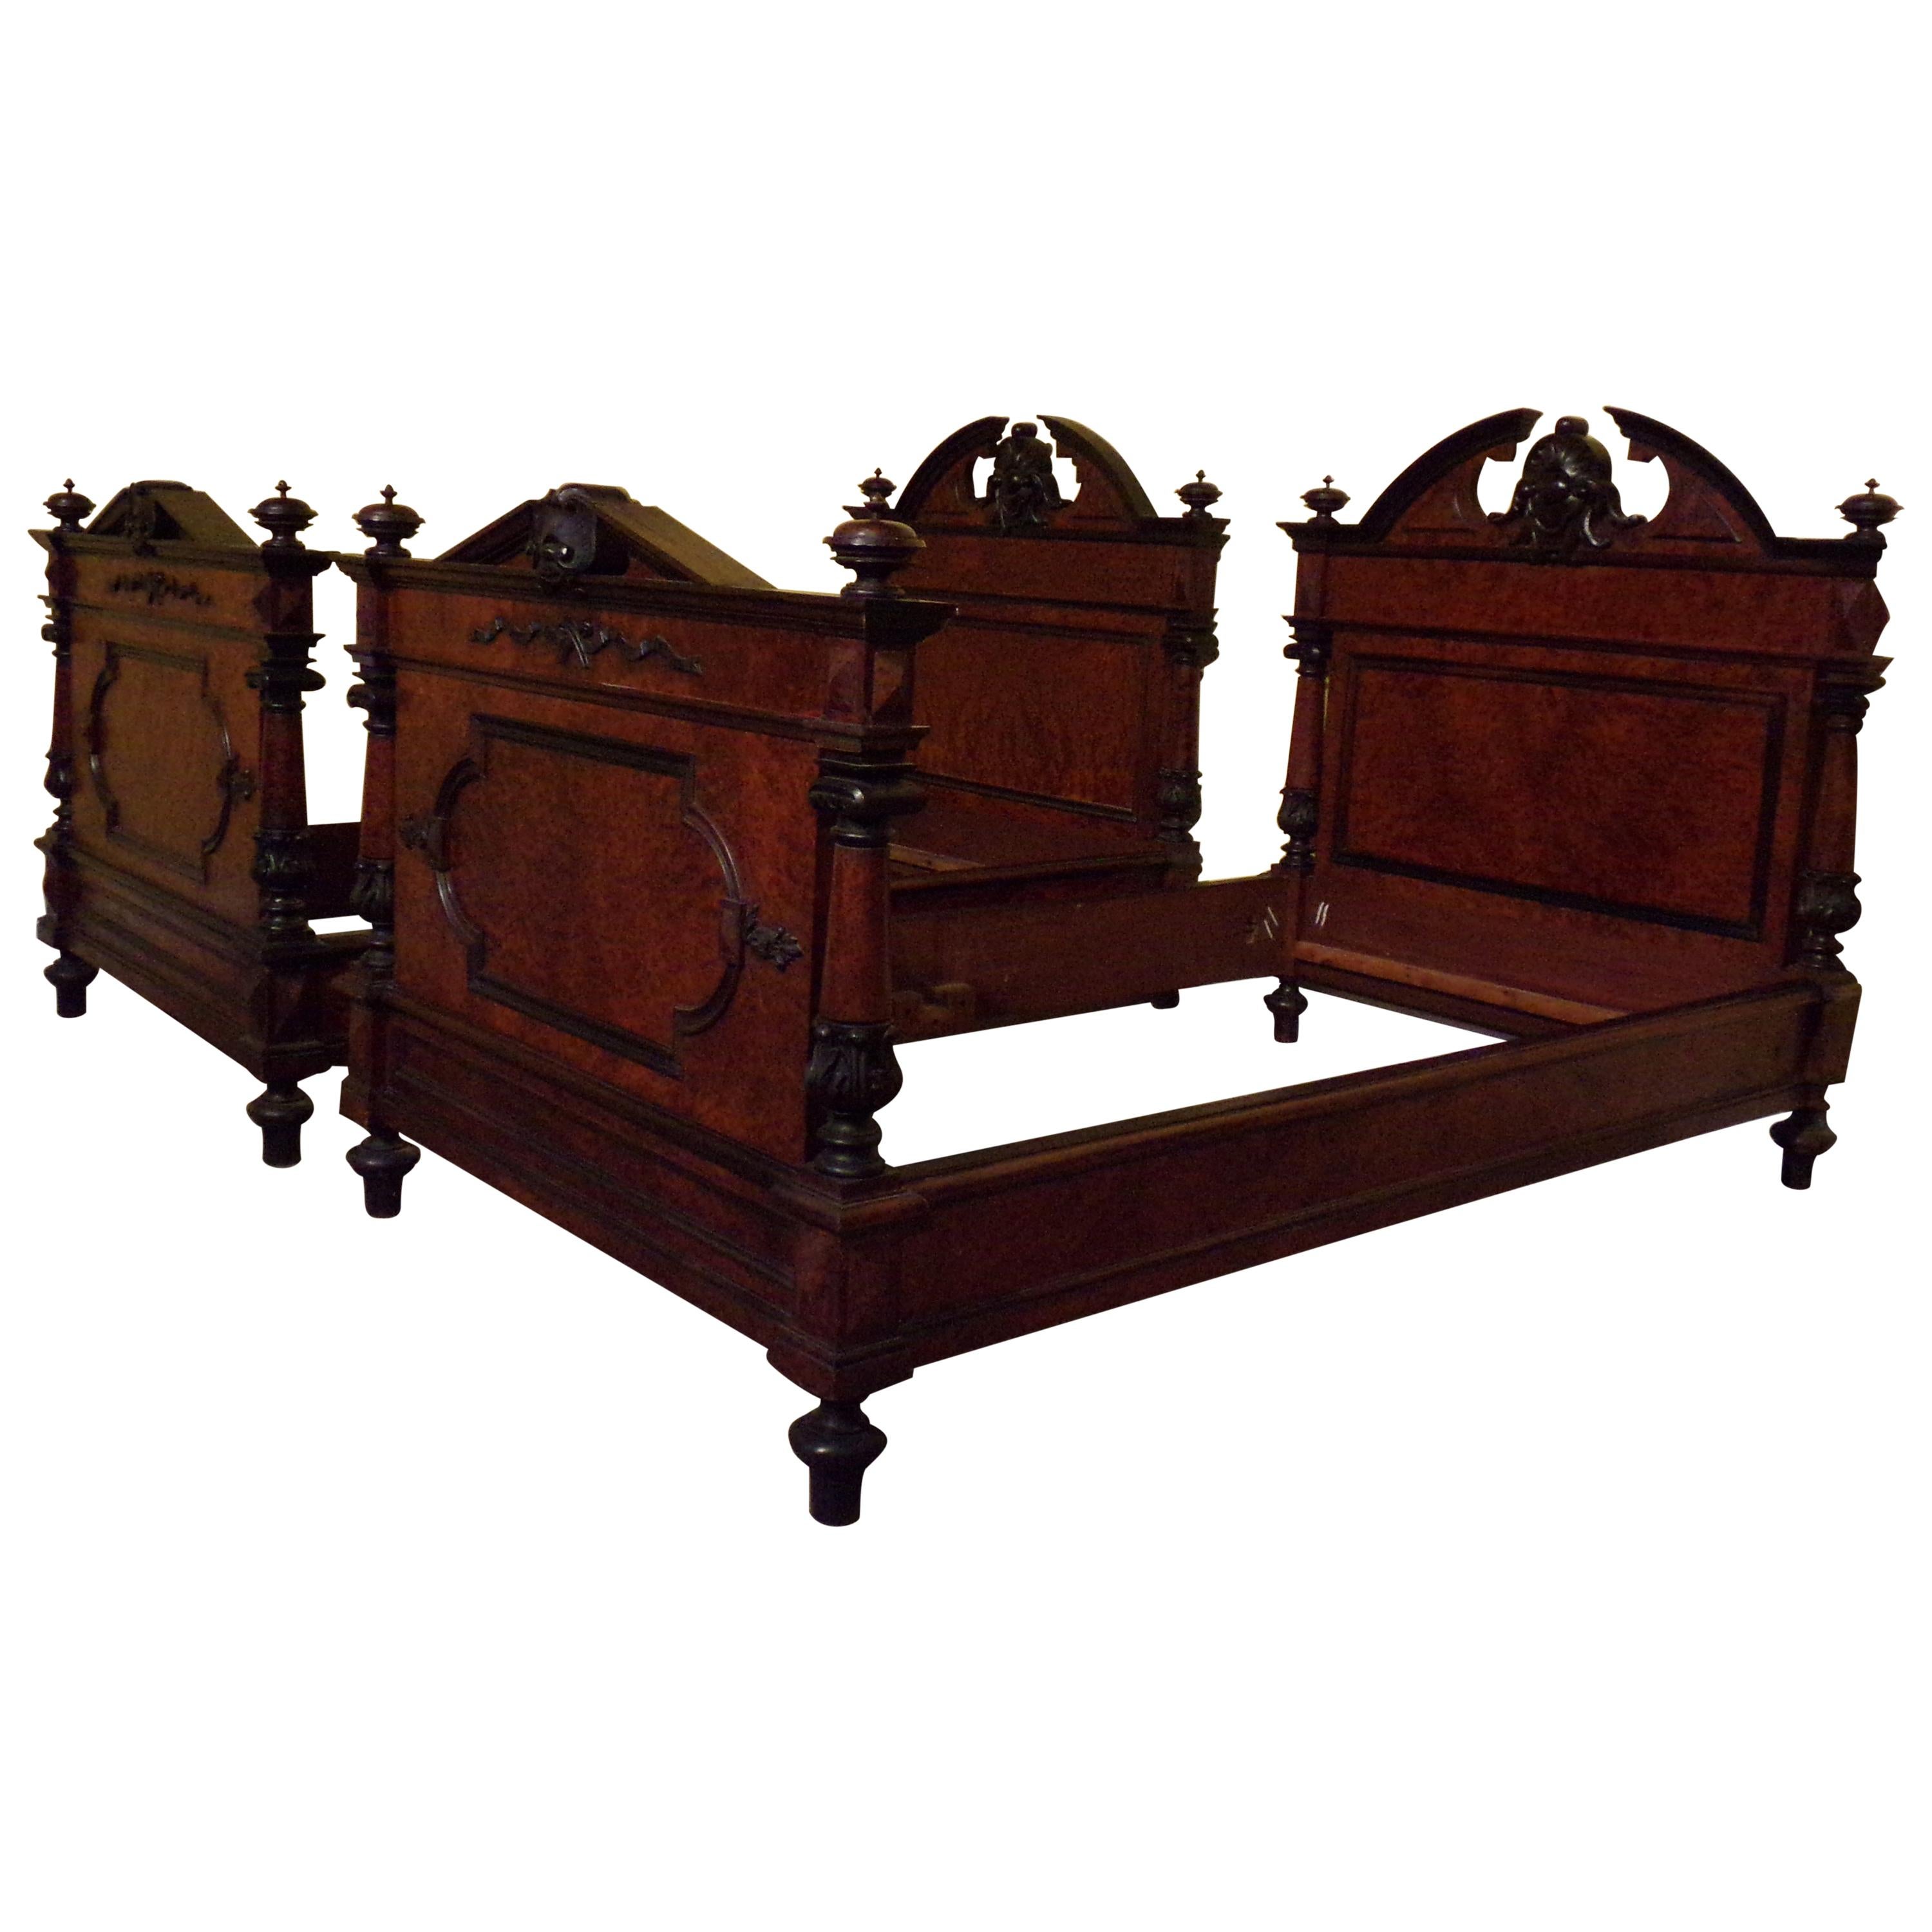 Pair of Portuguese Beds in Amboyna Wood, circa 1870